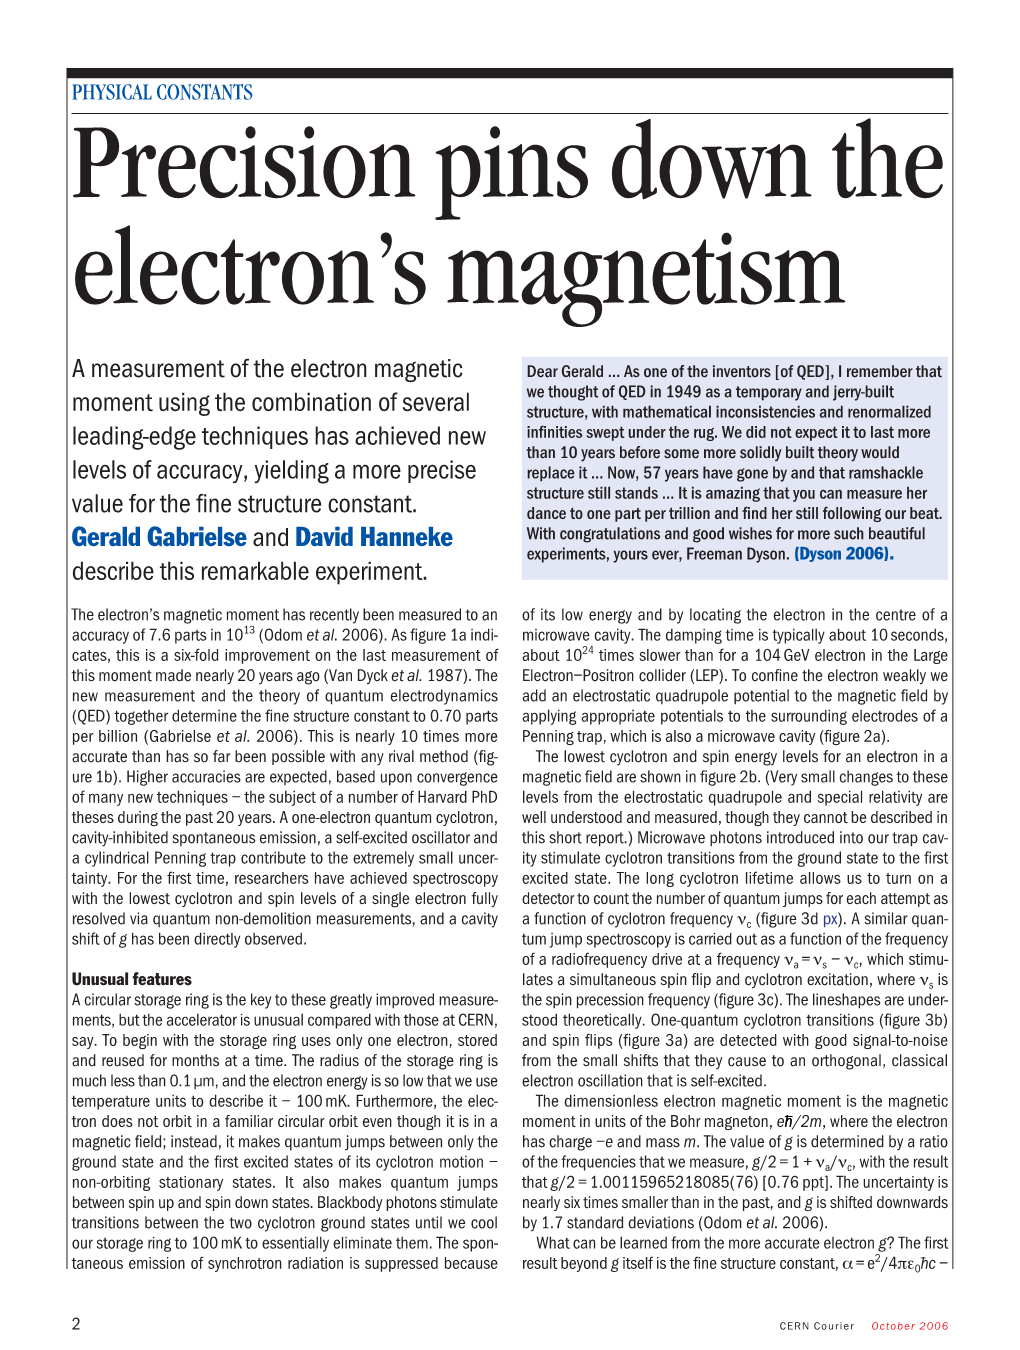 Precision Pins Down the Electron's Magnetism